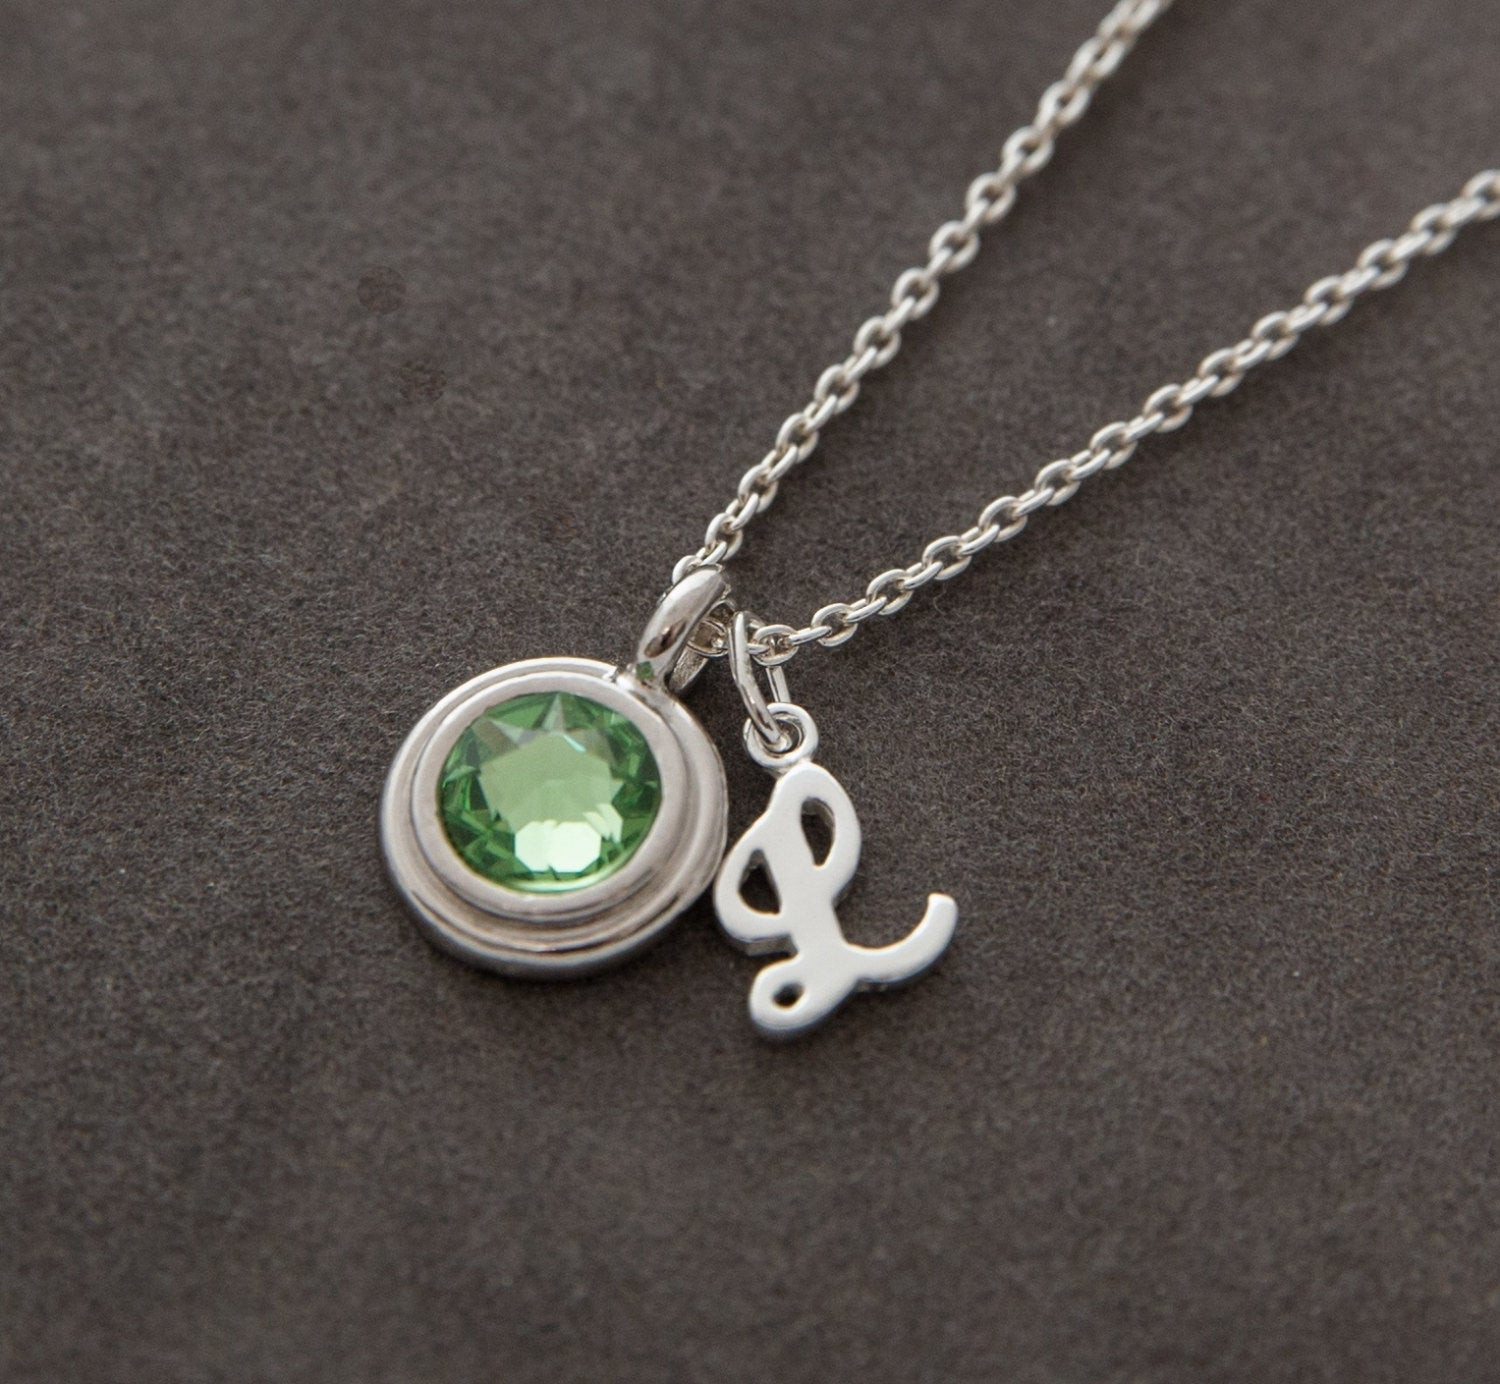 August Birthstone Necklace
 Silver Peridot Necklace August Birthstone Jewelry Swarovski